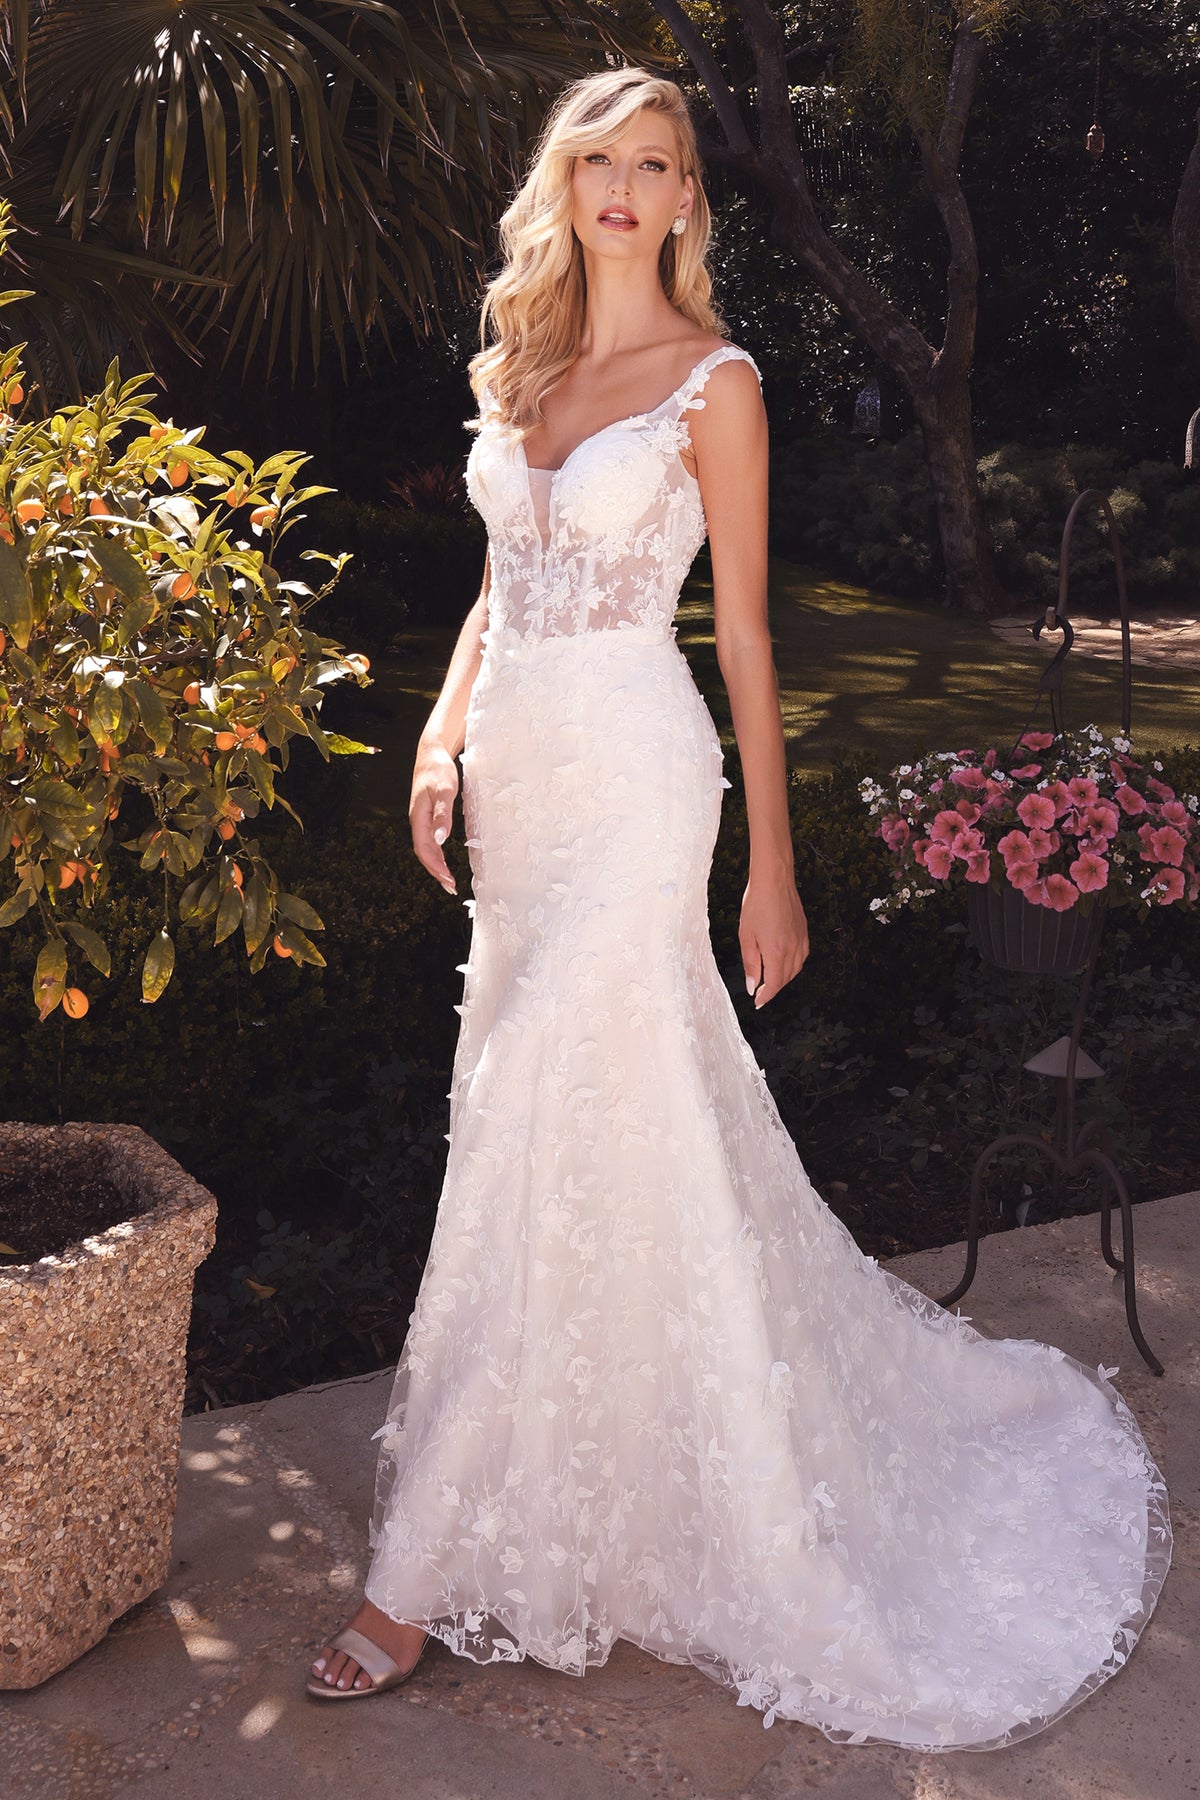 Stunning Wedding Gown with Deep Neckline and Floral Accents #CDTY01 - NORMA REED